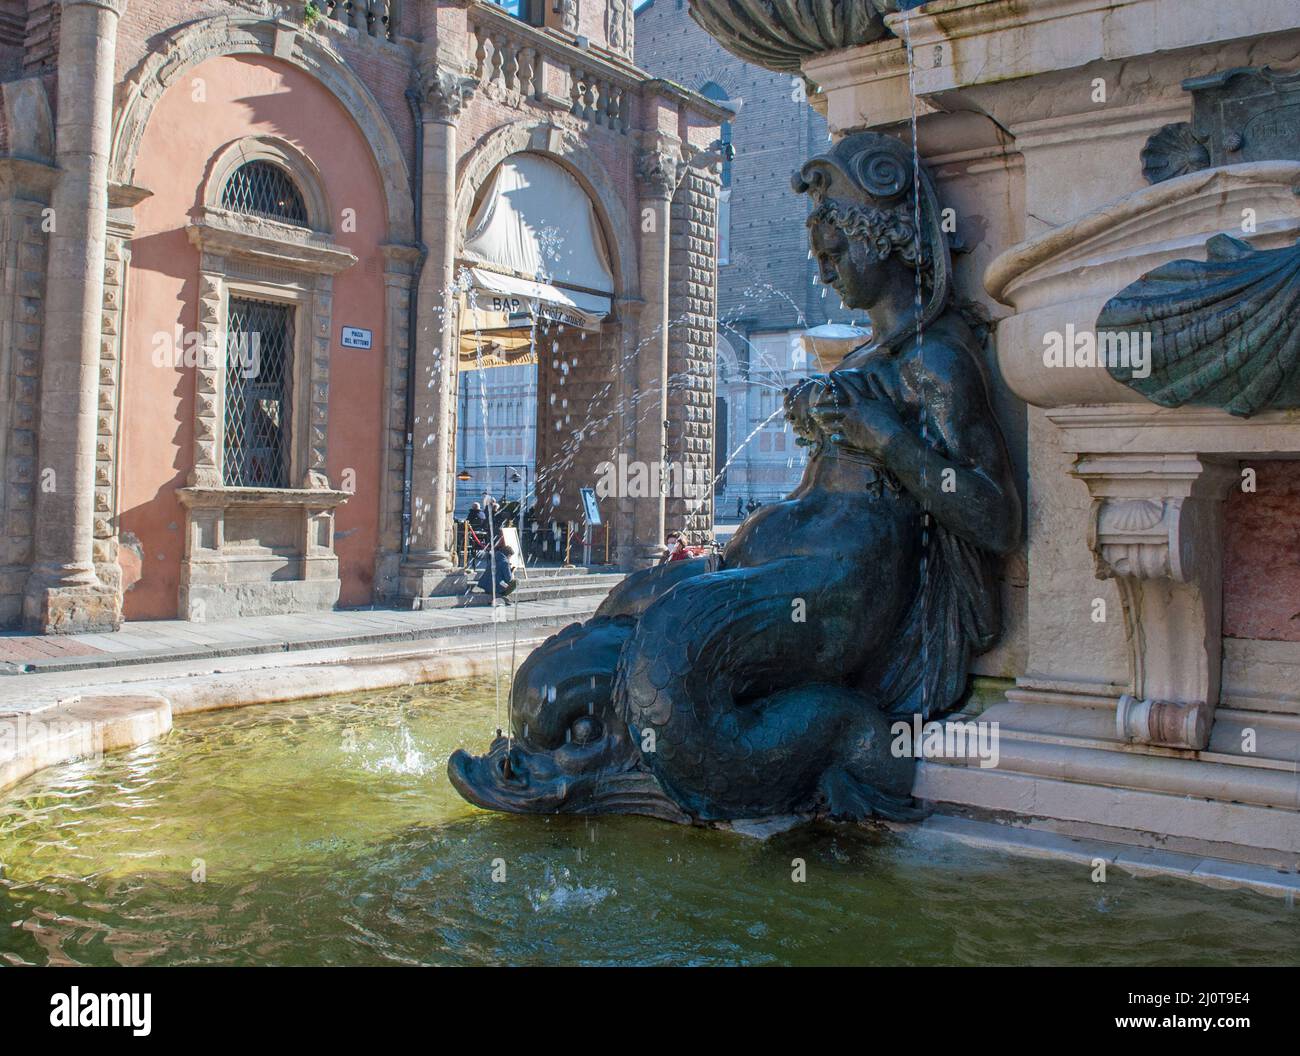 Details of the statue of Neptune in the city of Bologna Stock Photo